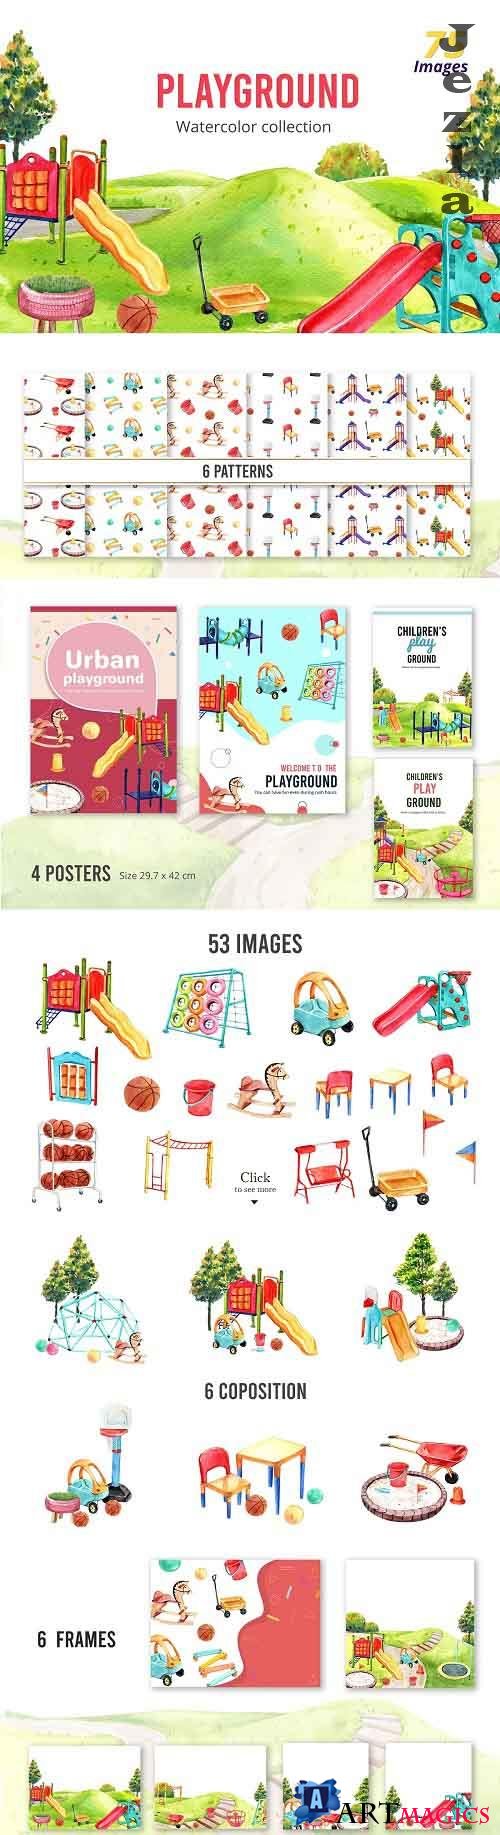 Playground Watercolor Collection - 5529626